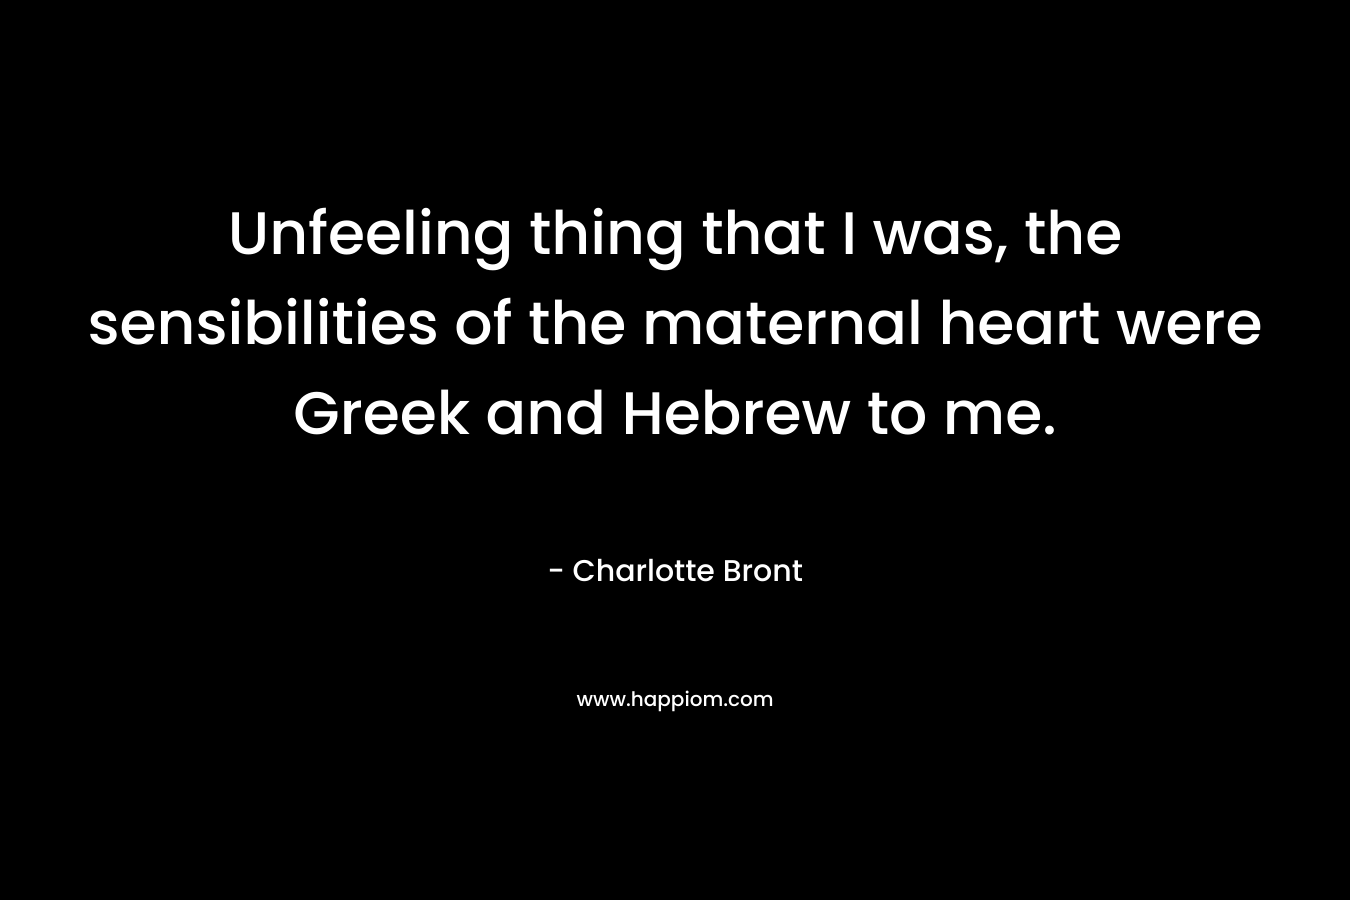 Unfeeling thing that I was, the sensibilities of the maternal heart were Greek and Hebrew to me. – Charlotte Bront